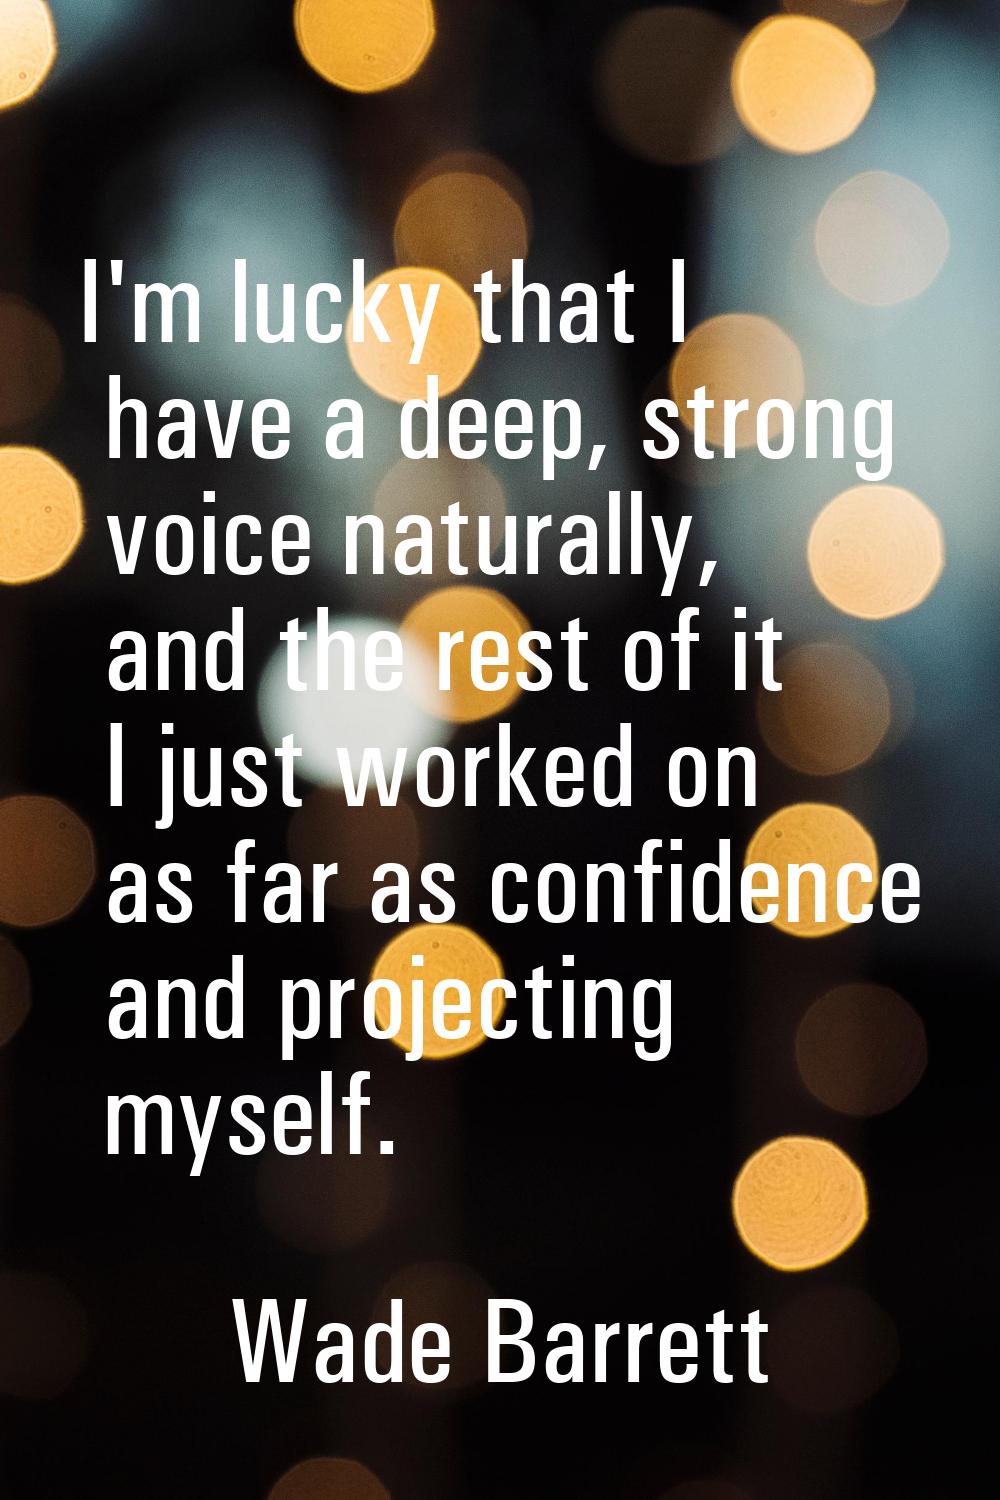 I'm lucky that I have a deep, strong voice naturally, and the rest of it I just worked on as far as